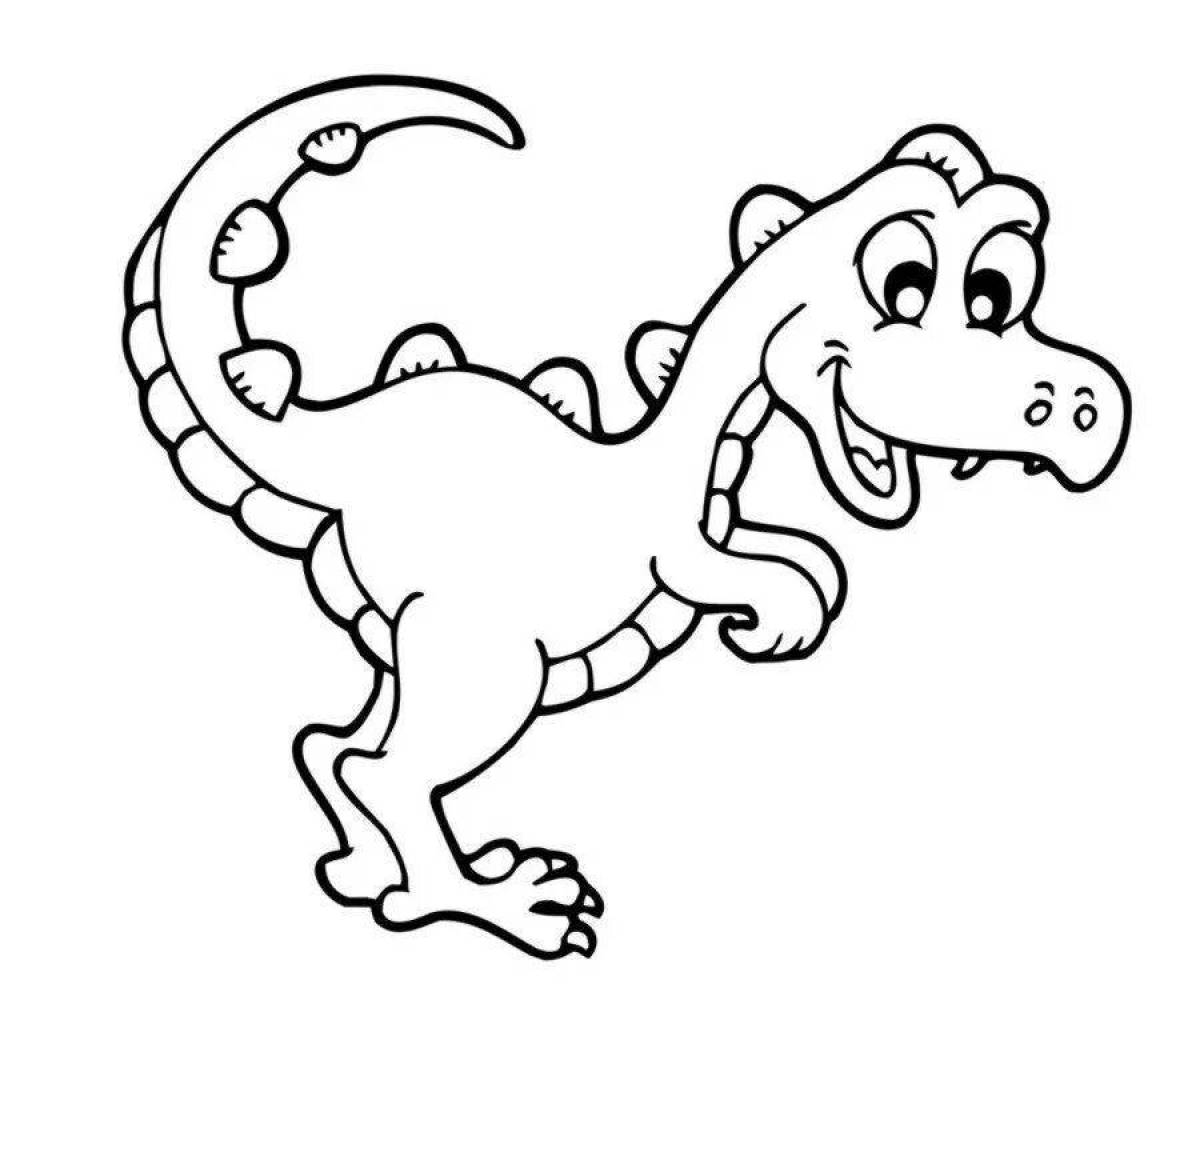 Color explosion dinosaur coloring book for kids